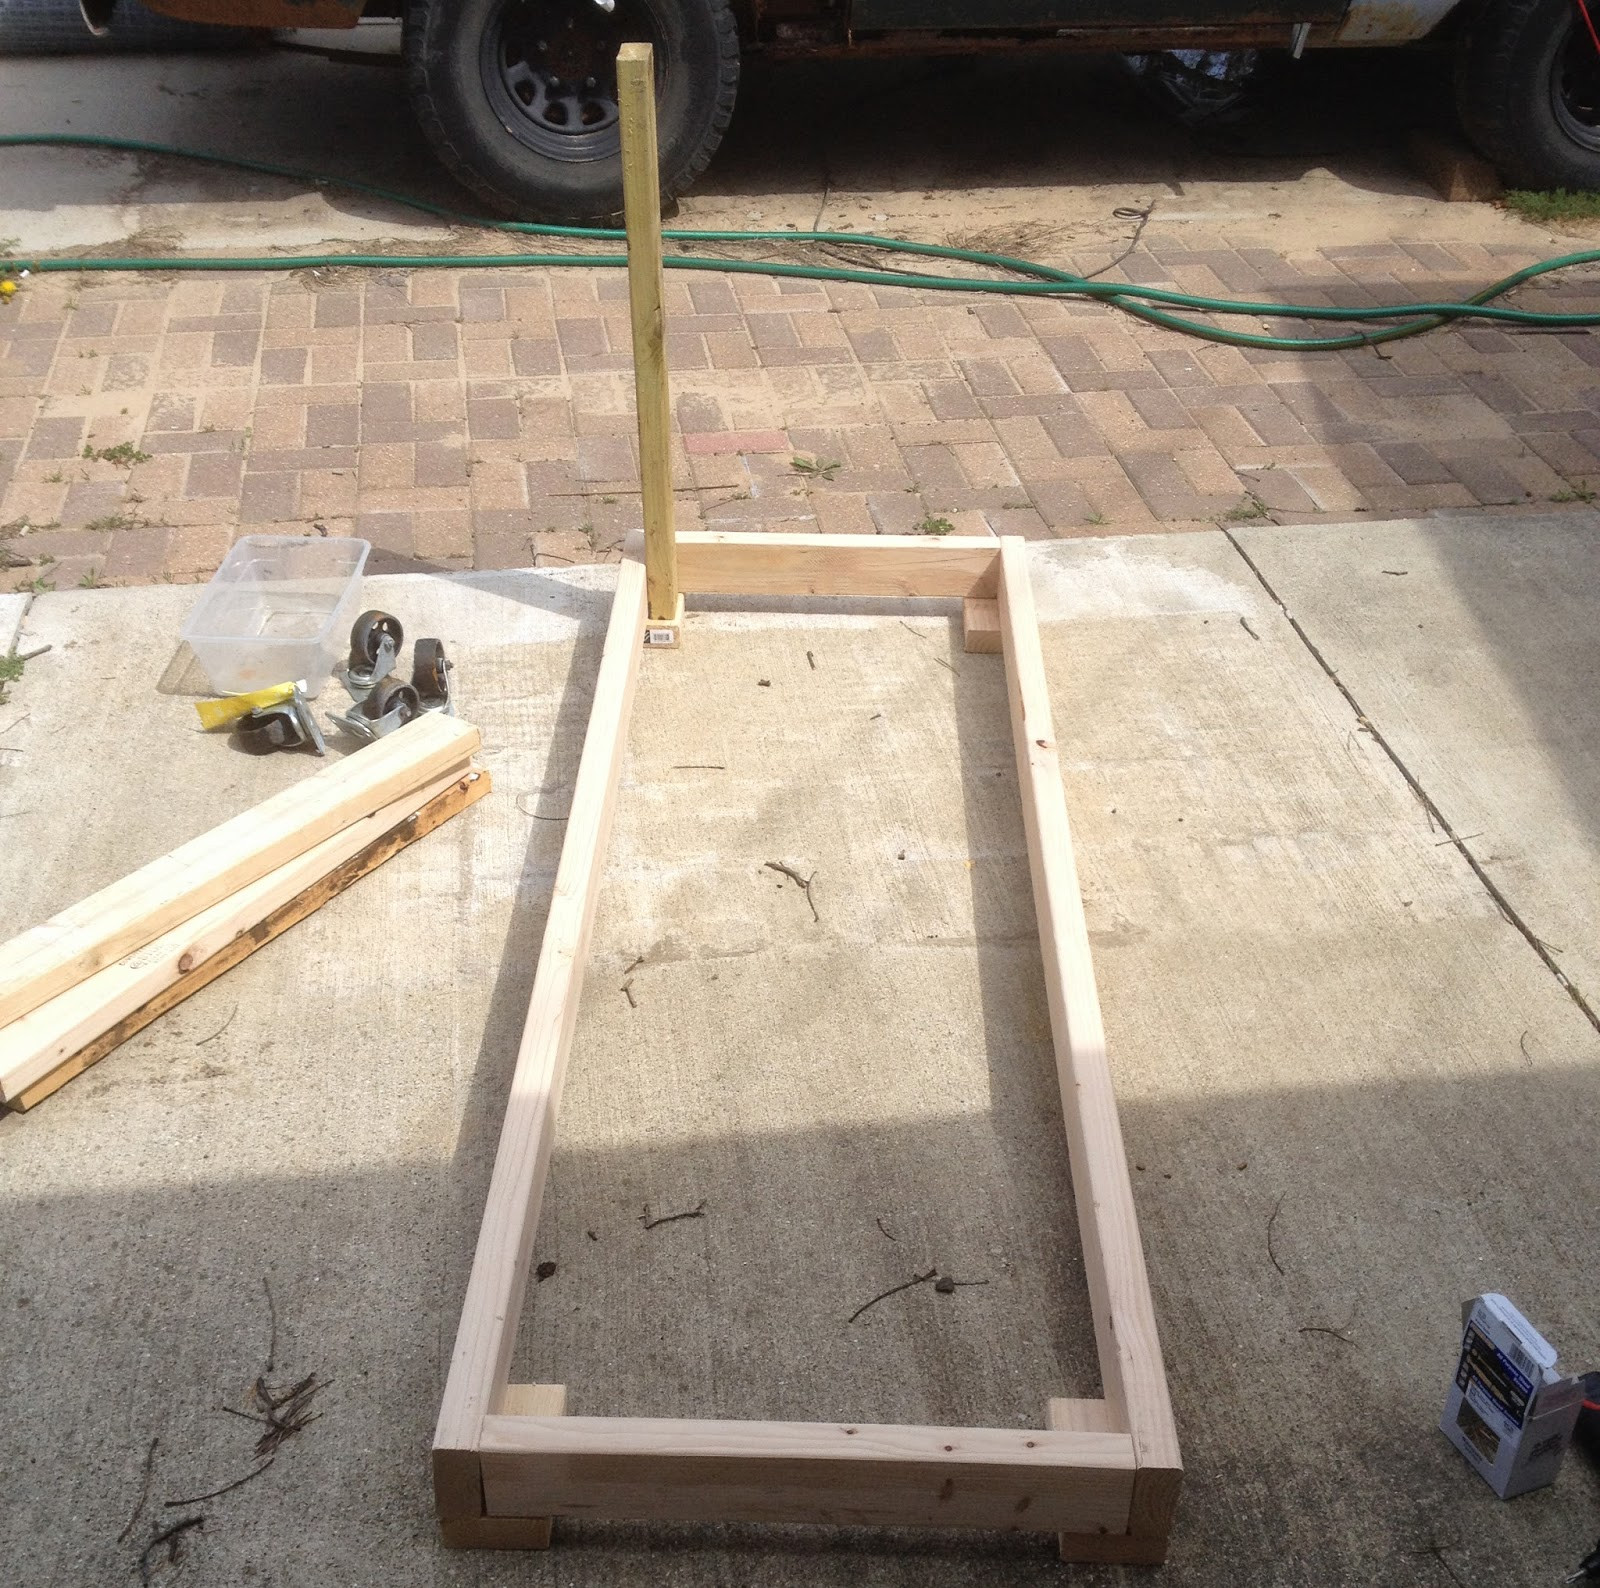 Best ideas about DIY Table Saw Table
. Save or Pin DIY Table Saw Stand on Casters Now.